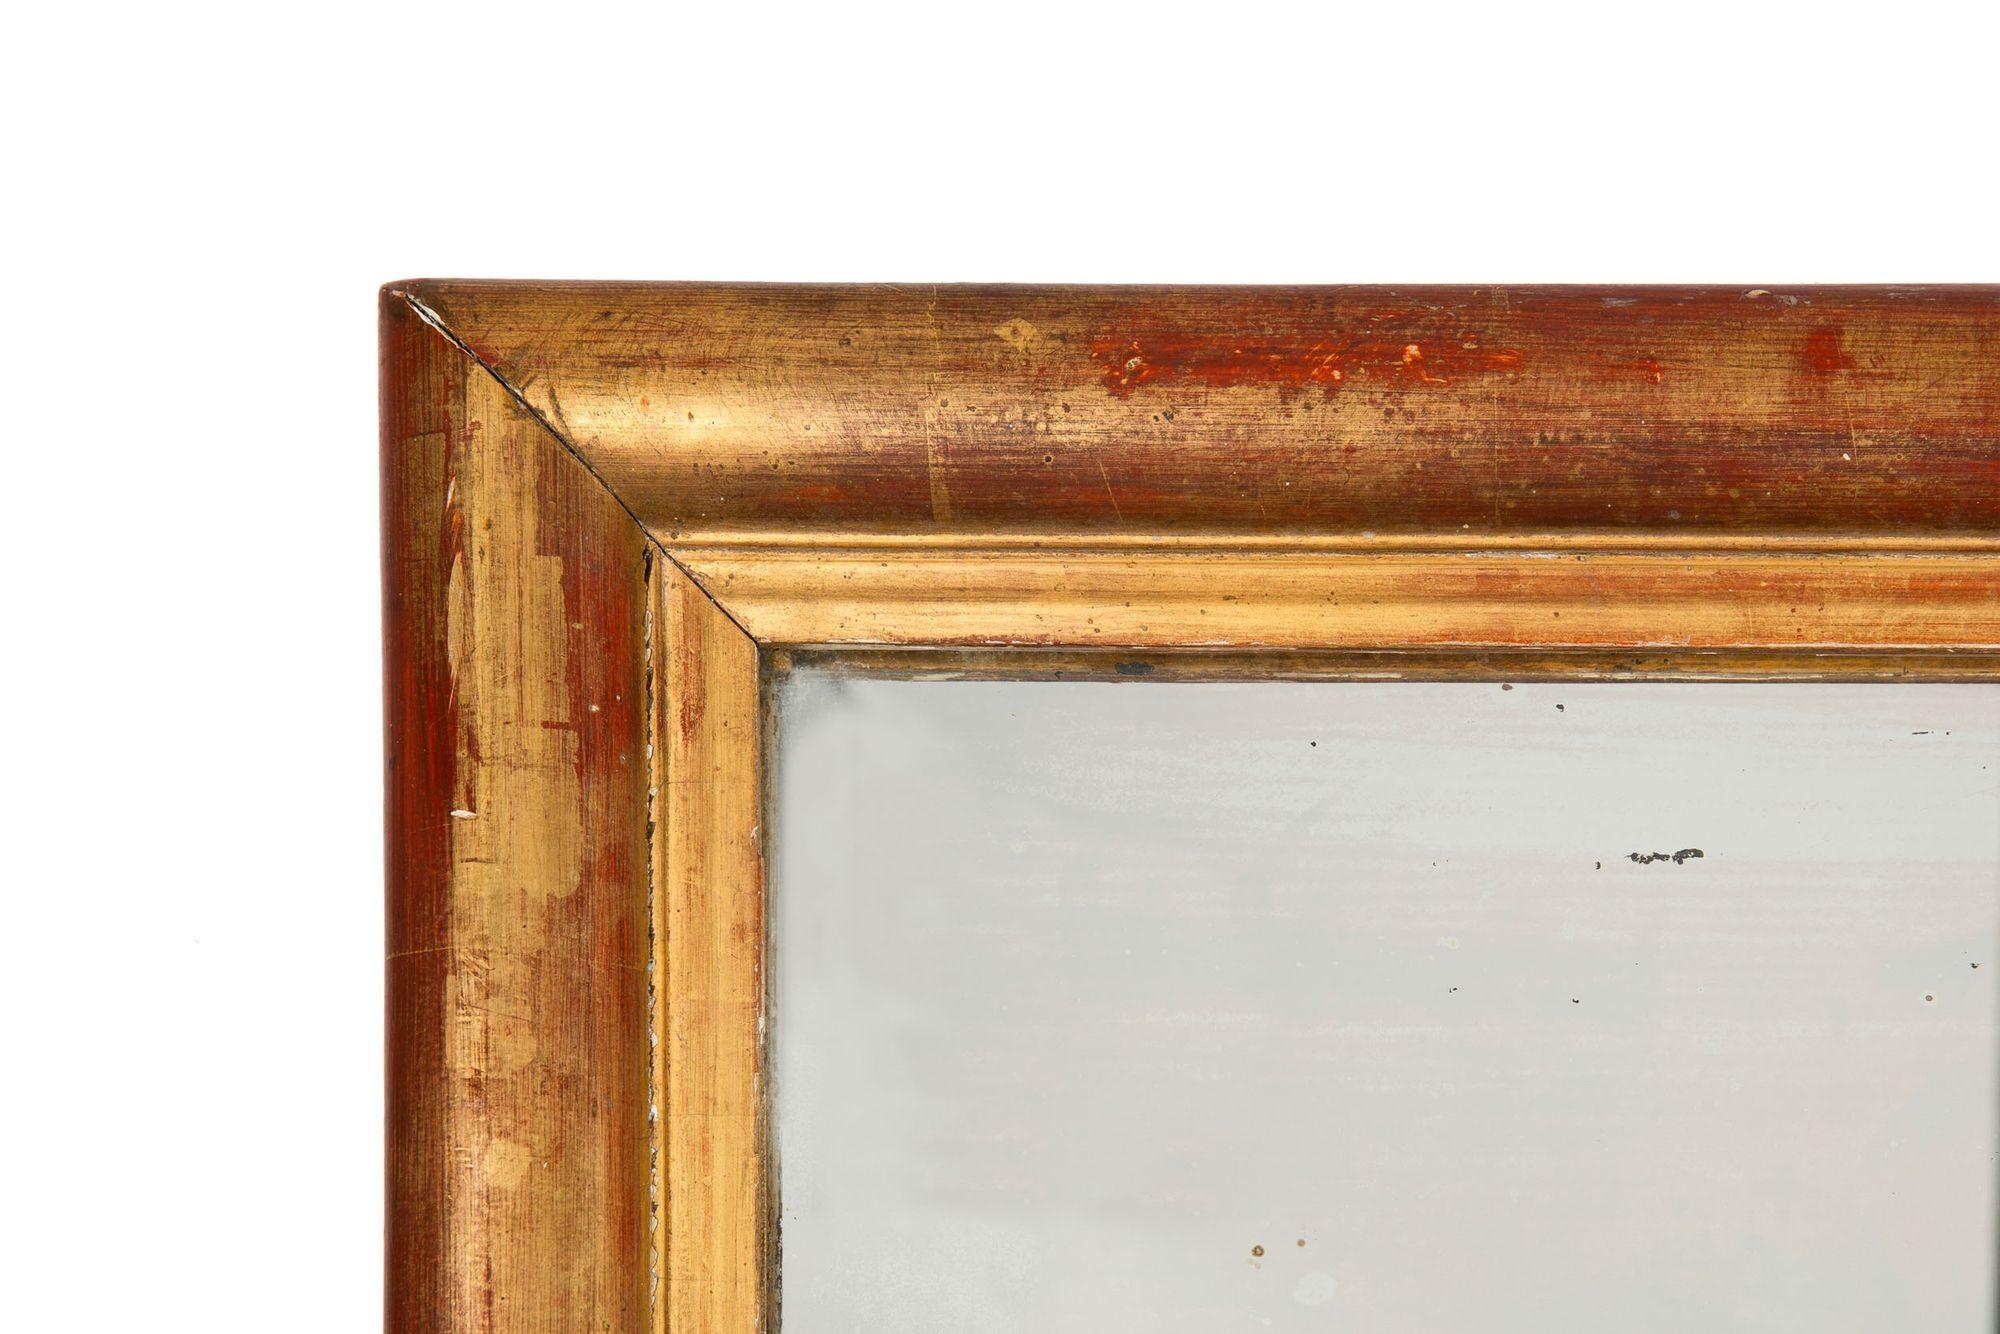 FRENCH LOUIS PHILIPPE WALL MIRROR
Circa late 19th century
Item # 306IVX21P 

This nearly full-length wall mirror from the Louis Philippe period features an incredibly relevant form that melds well with today's home, finding itself a perfect fit both